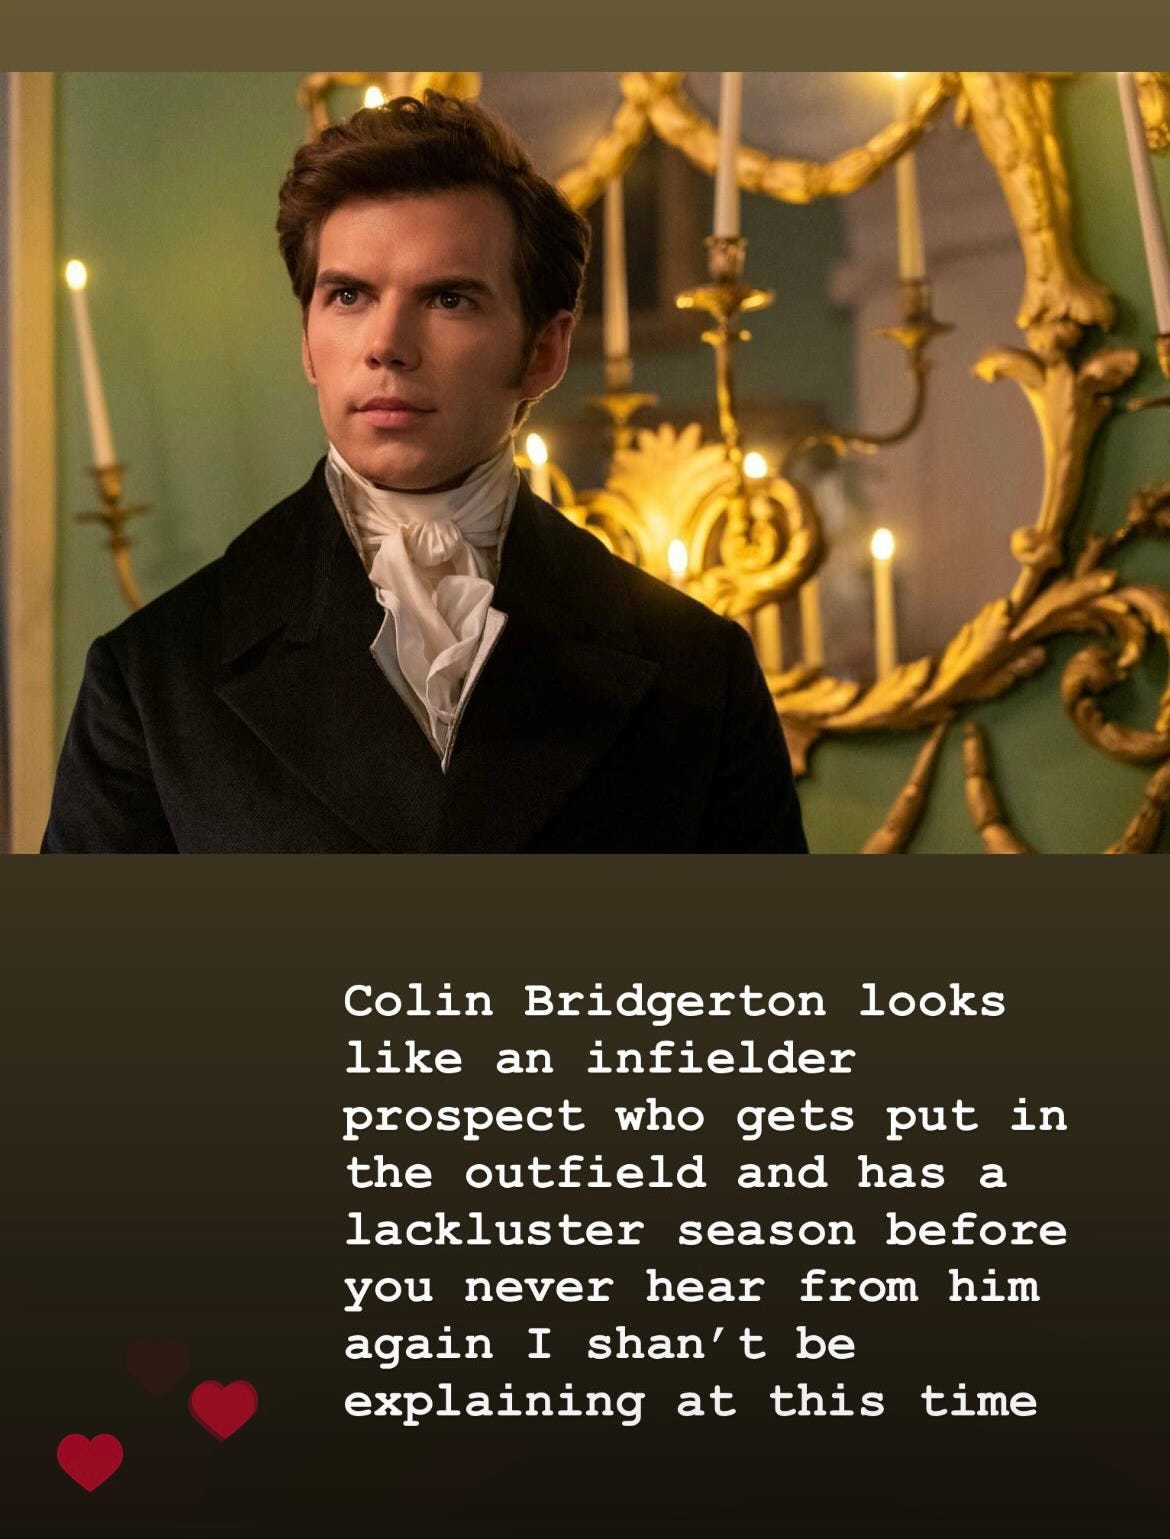 Screenshot from my Instagram showing Colin Bridgerton, a white man with brown hair dressed in the Regency style with a cravat and jacket, and the caption says "Colin Bridgerton looks like an infielder prospect who gets put in the outfield and has a lackluster season before you never hear from him again I shan't be explaining at this time"